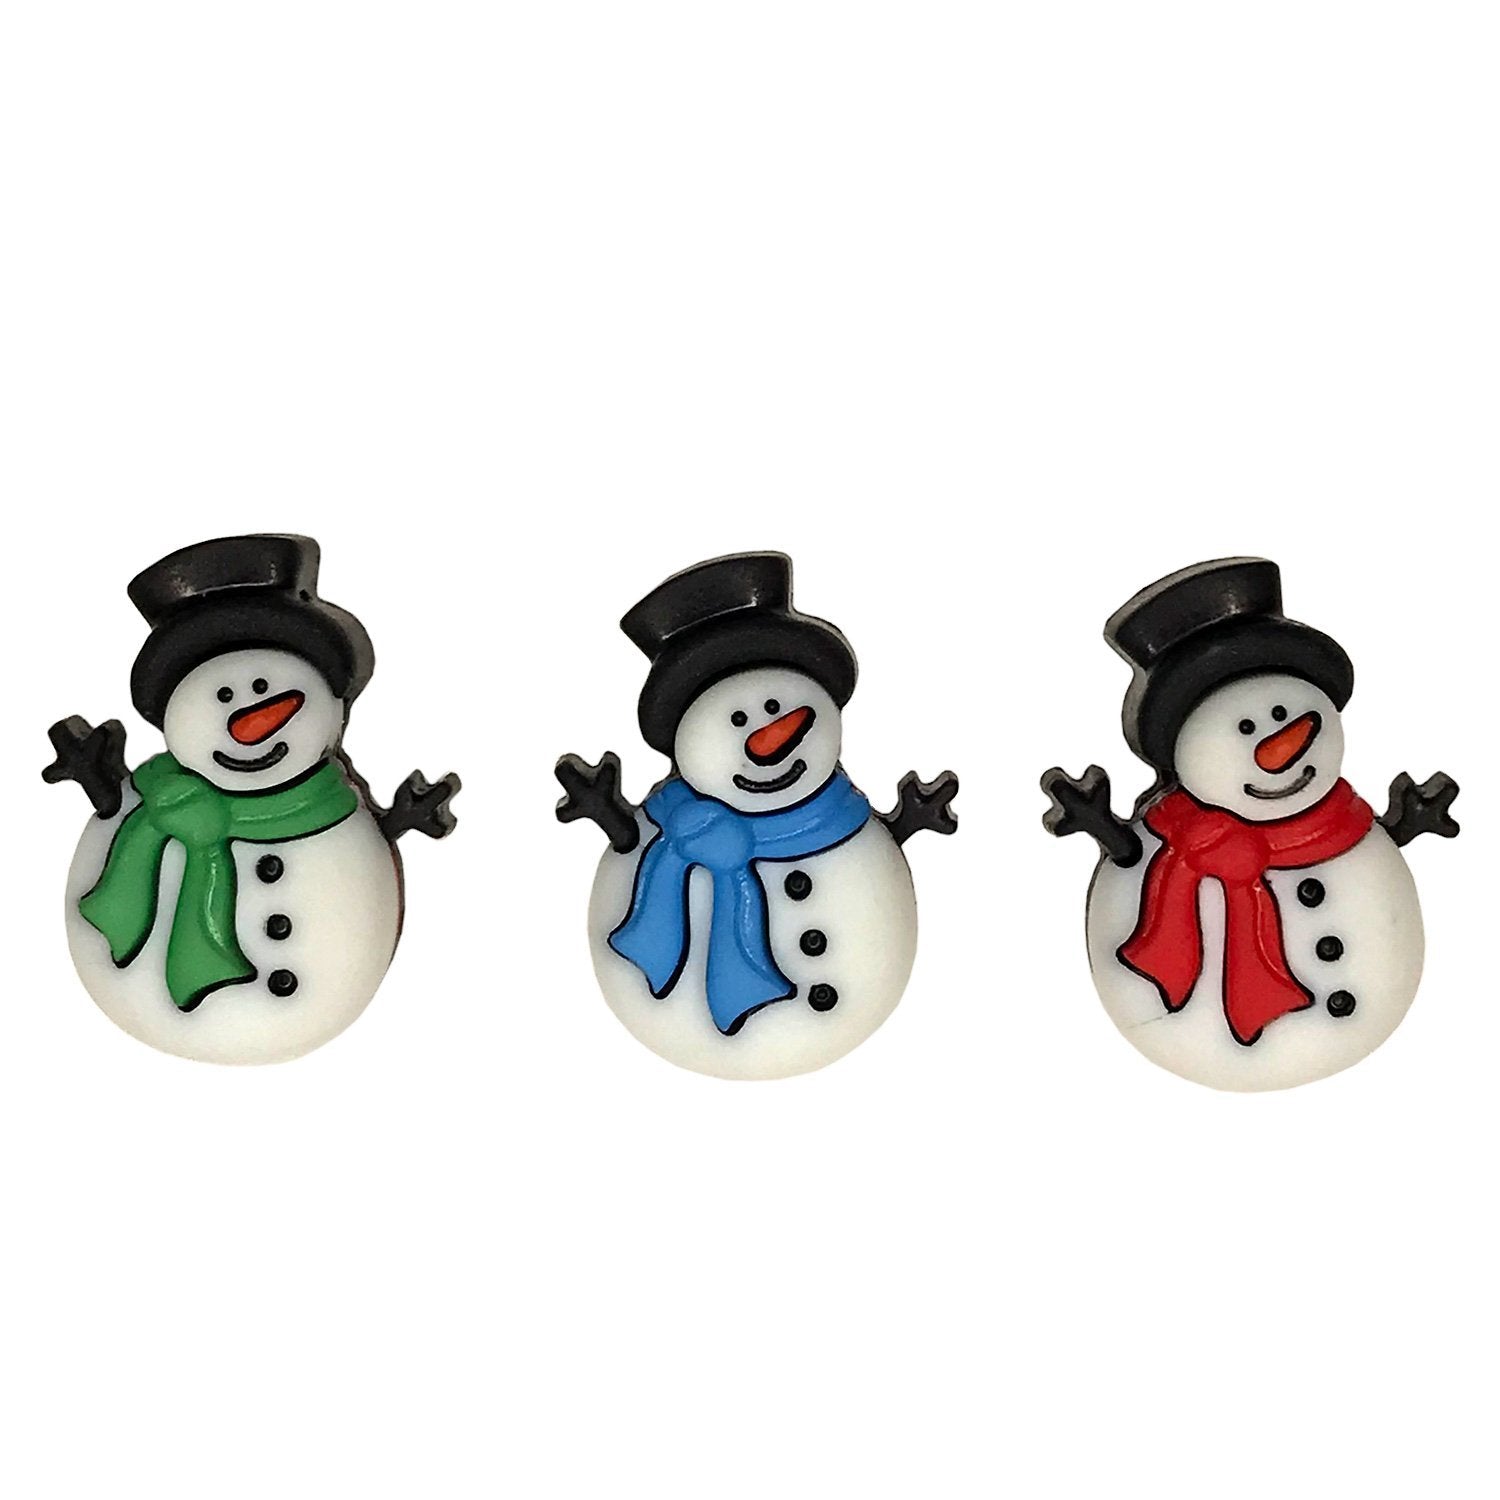 Happy Snowman - SB5 - Buttons Galore and More